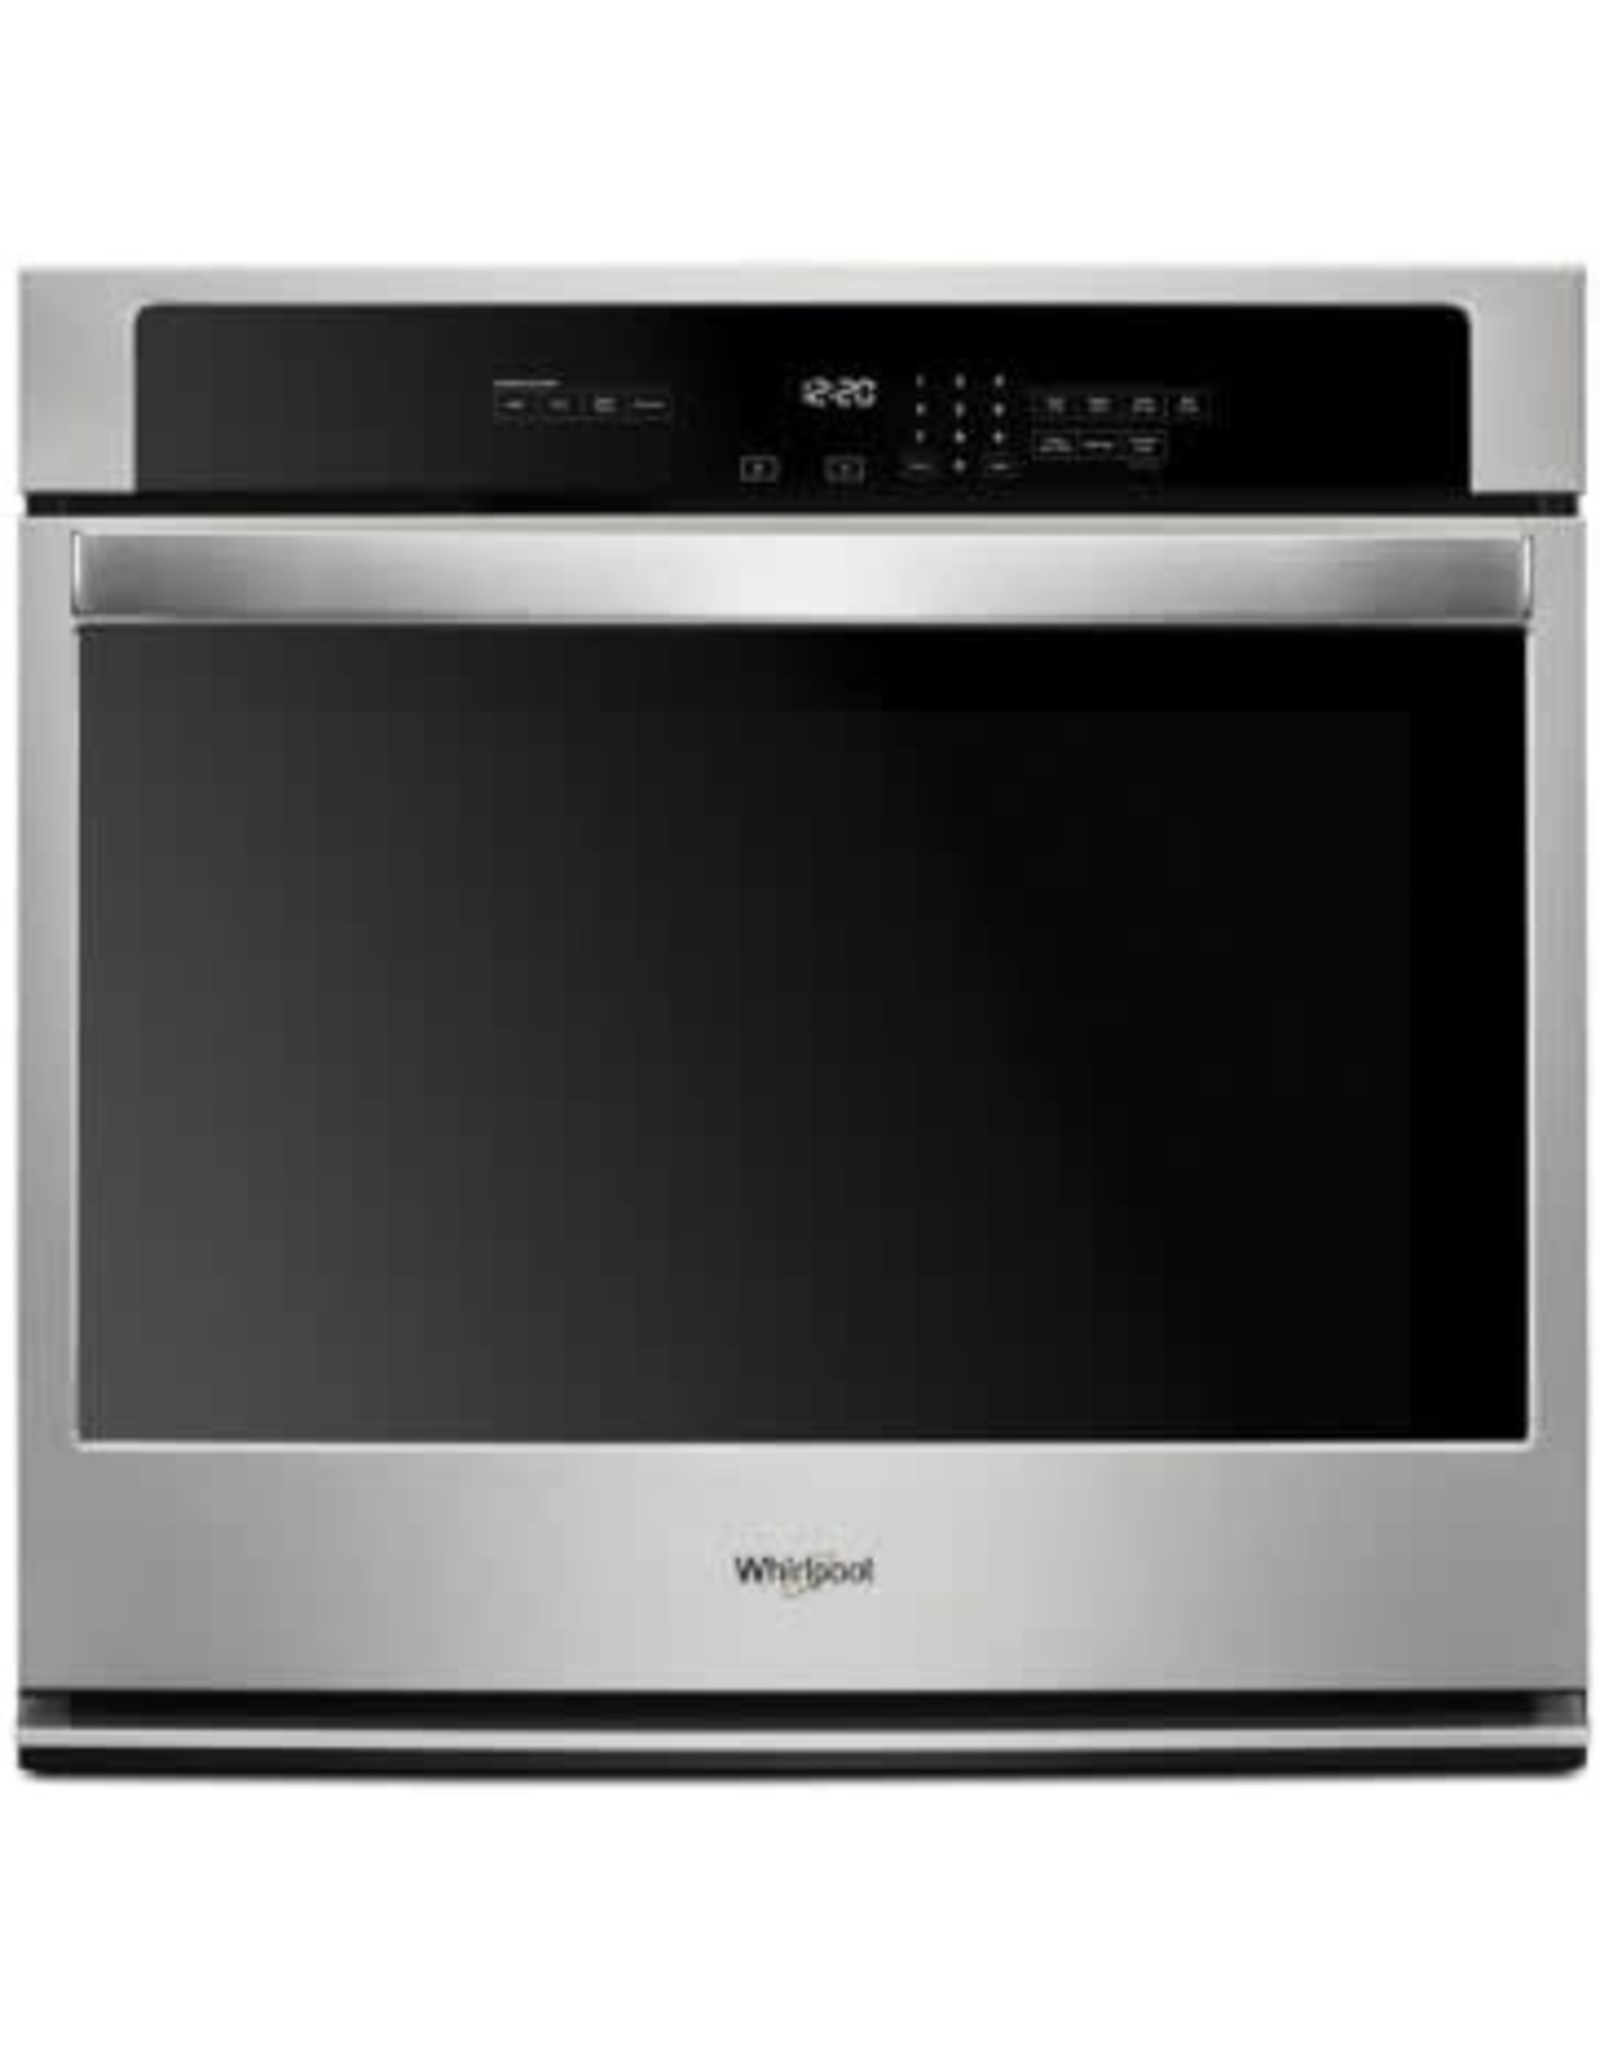 WHIRLPOOL WOS31ES0JS 30 in. Single Electric Thermal Wall Oven with Self-Cleaning in Stainless Steel30 in. Single Electric Thermal Wall Oven with Self-Cleaning in Stainless Steel